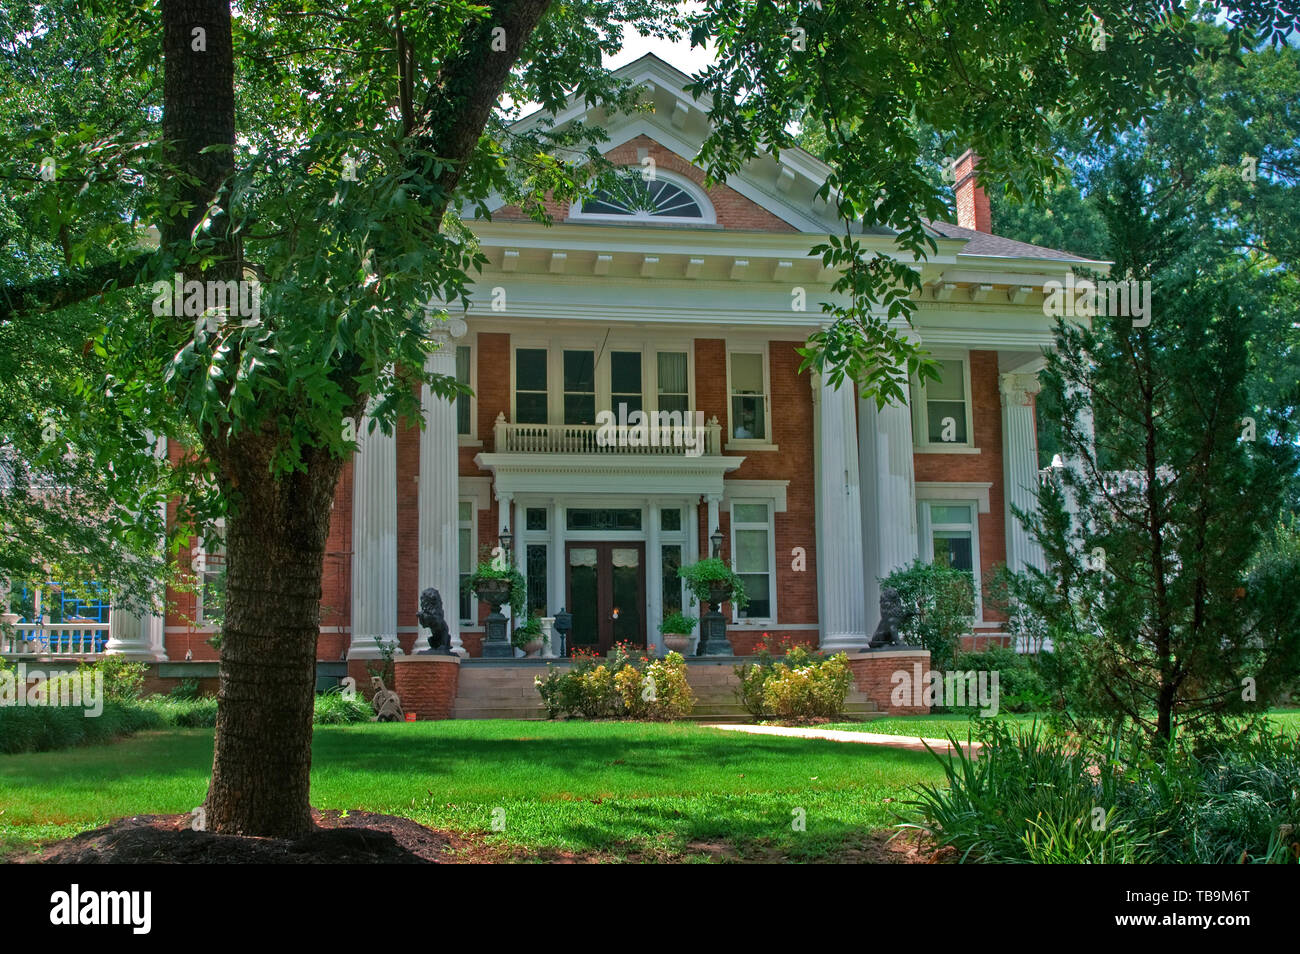 Highland House is pictured in Columbus, Mississippi, Aug. 16, 2010. The 9,000-square foot historic home represents the Greek Revival Style. Stock Photo